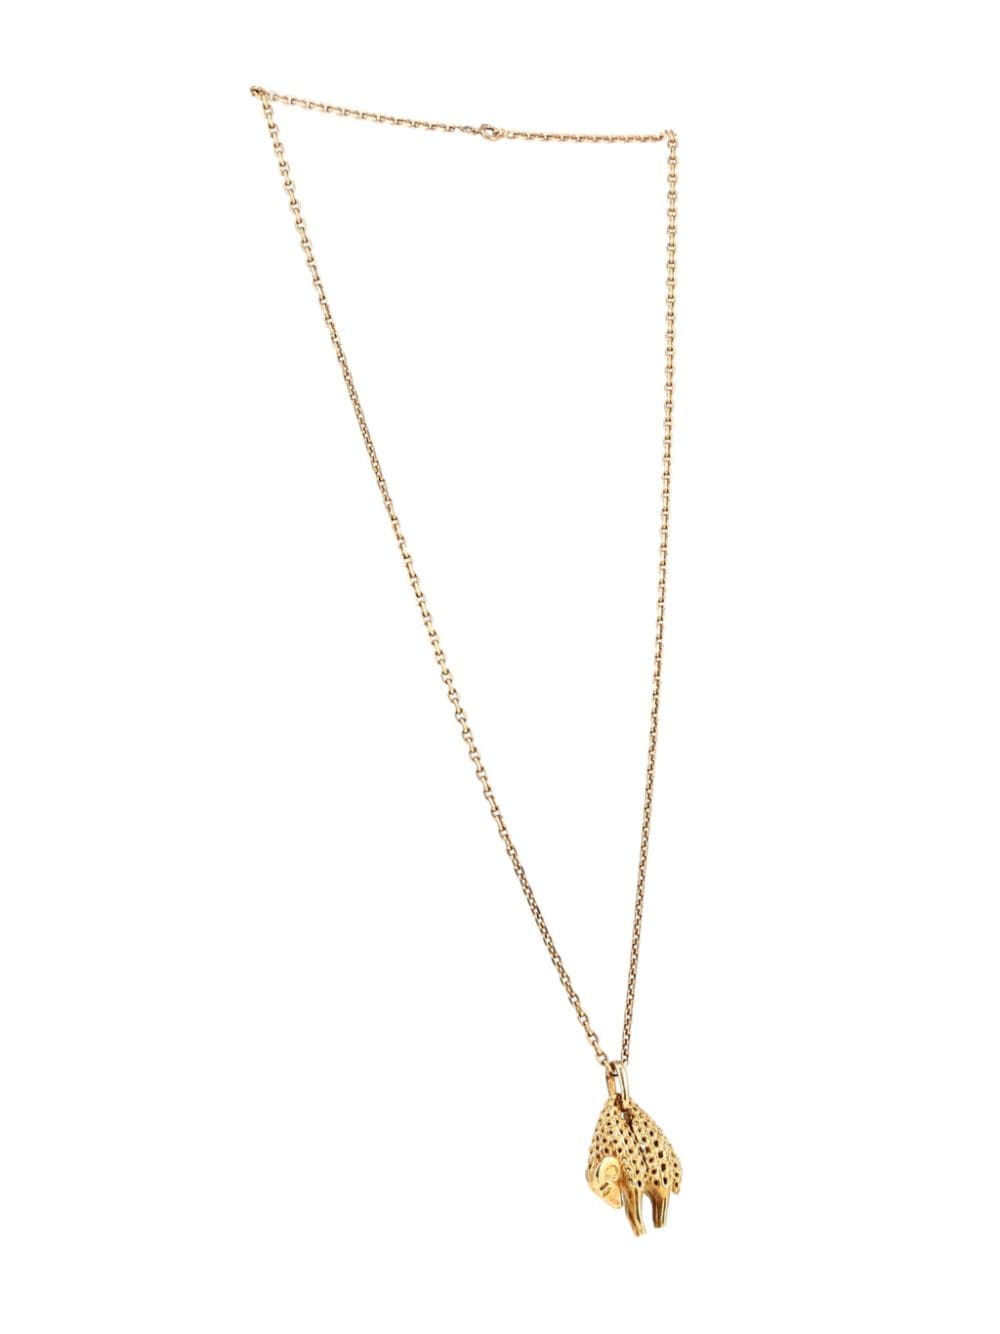 Pre-owned Cartier 1970s Toison D'or Ram Pendant Necklace In Gold